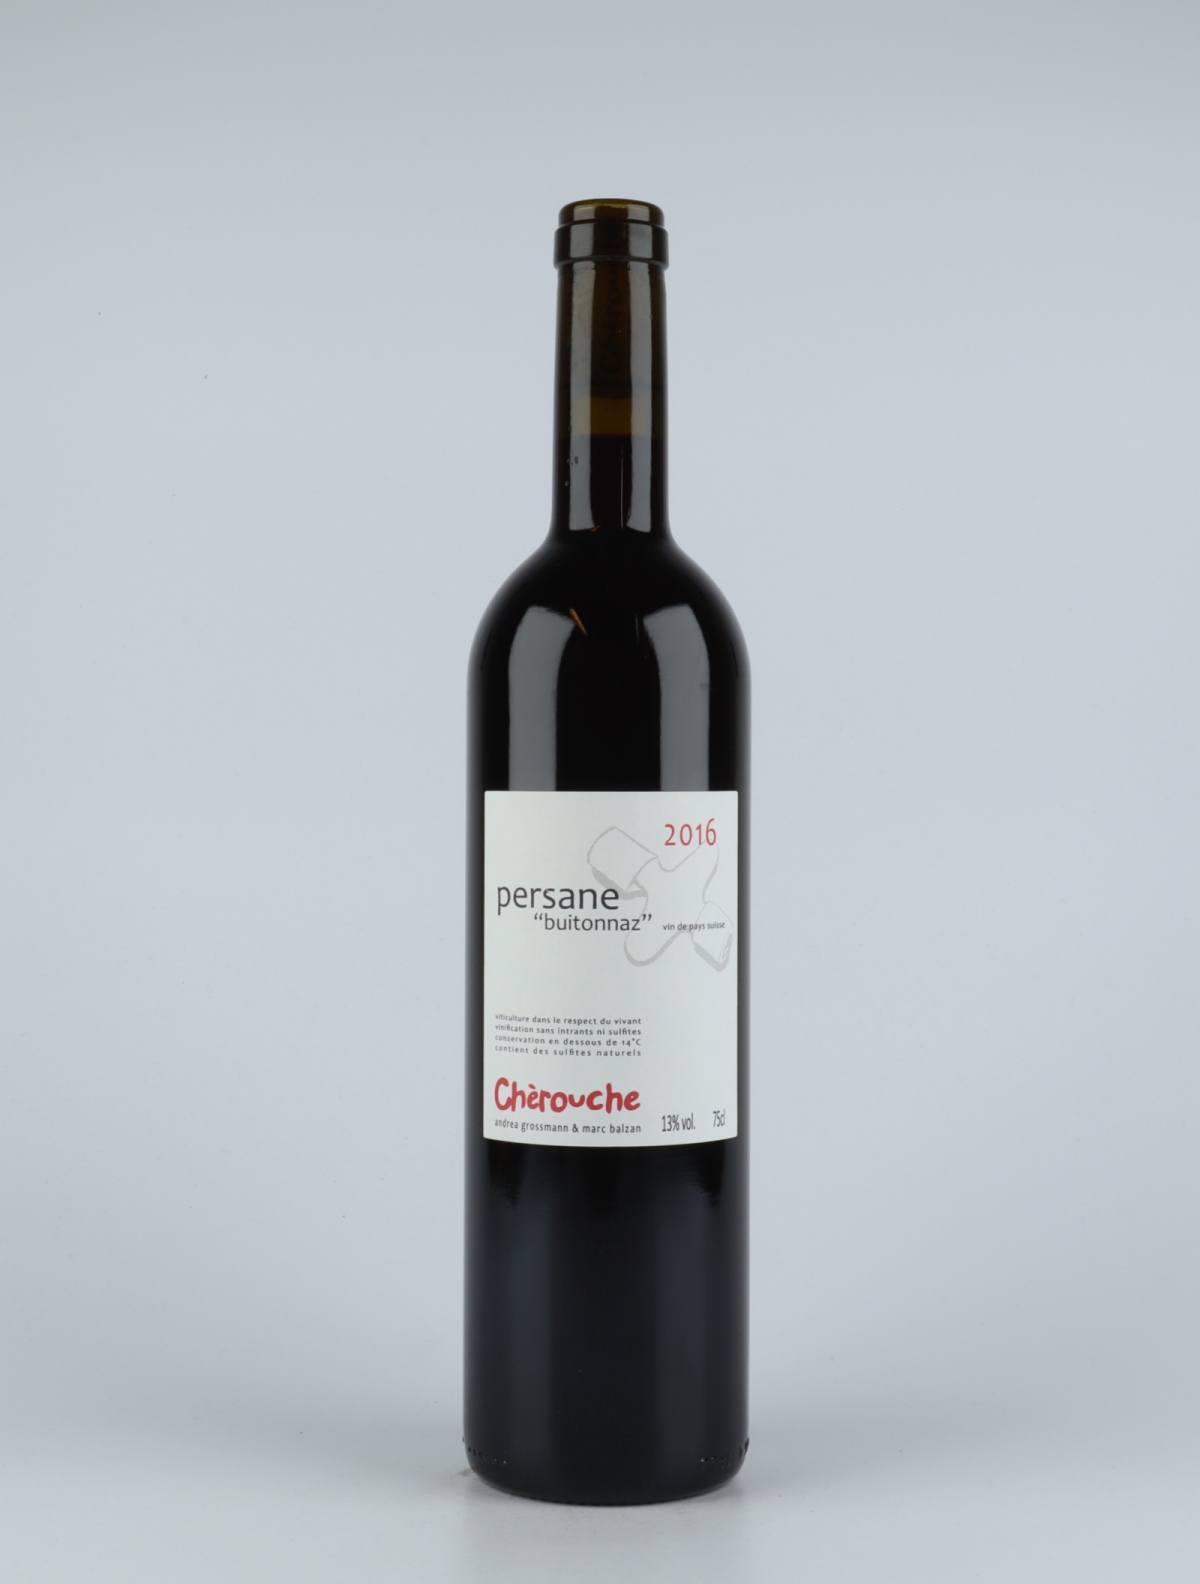 A bottle 2016 Persane Syrah Red wine from Chèrouche, Valais in 